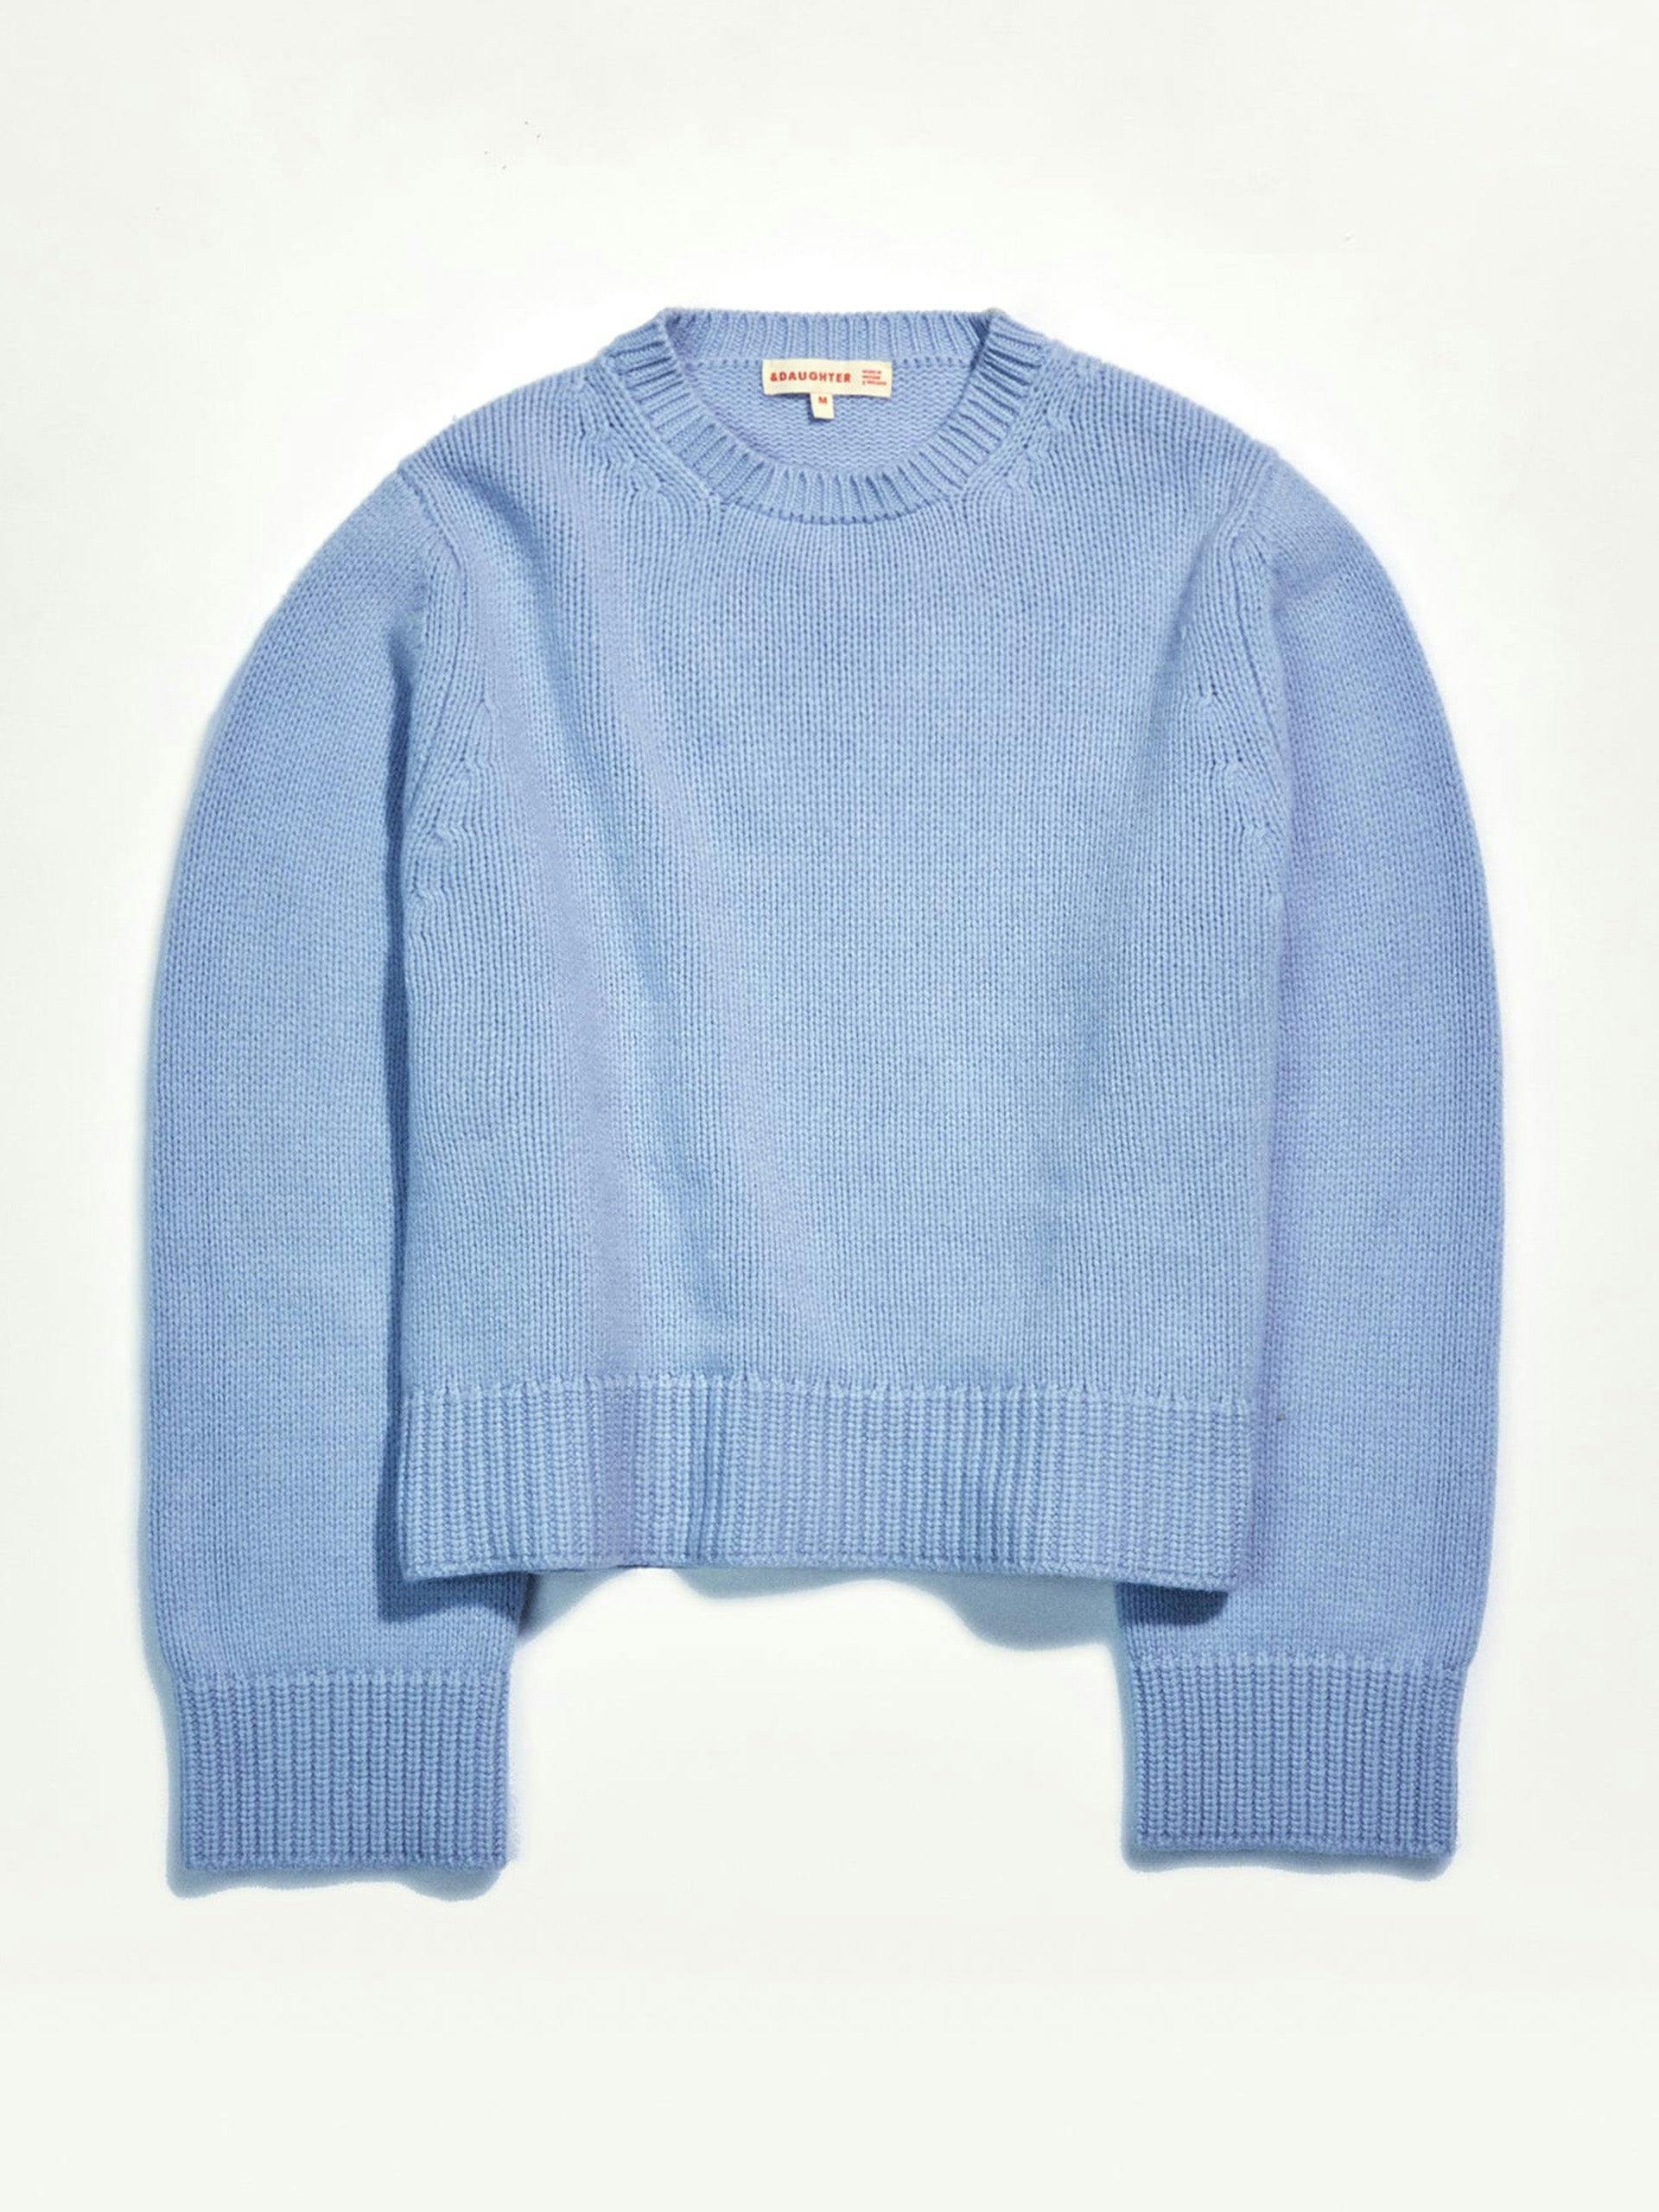 Slouch wool/cashmere crewneck in pale blue